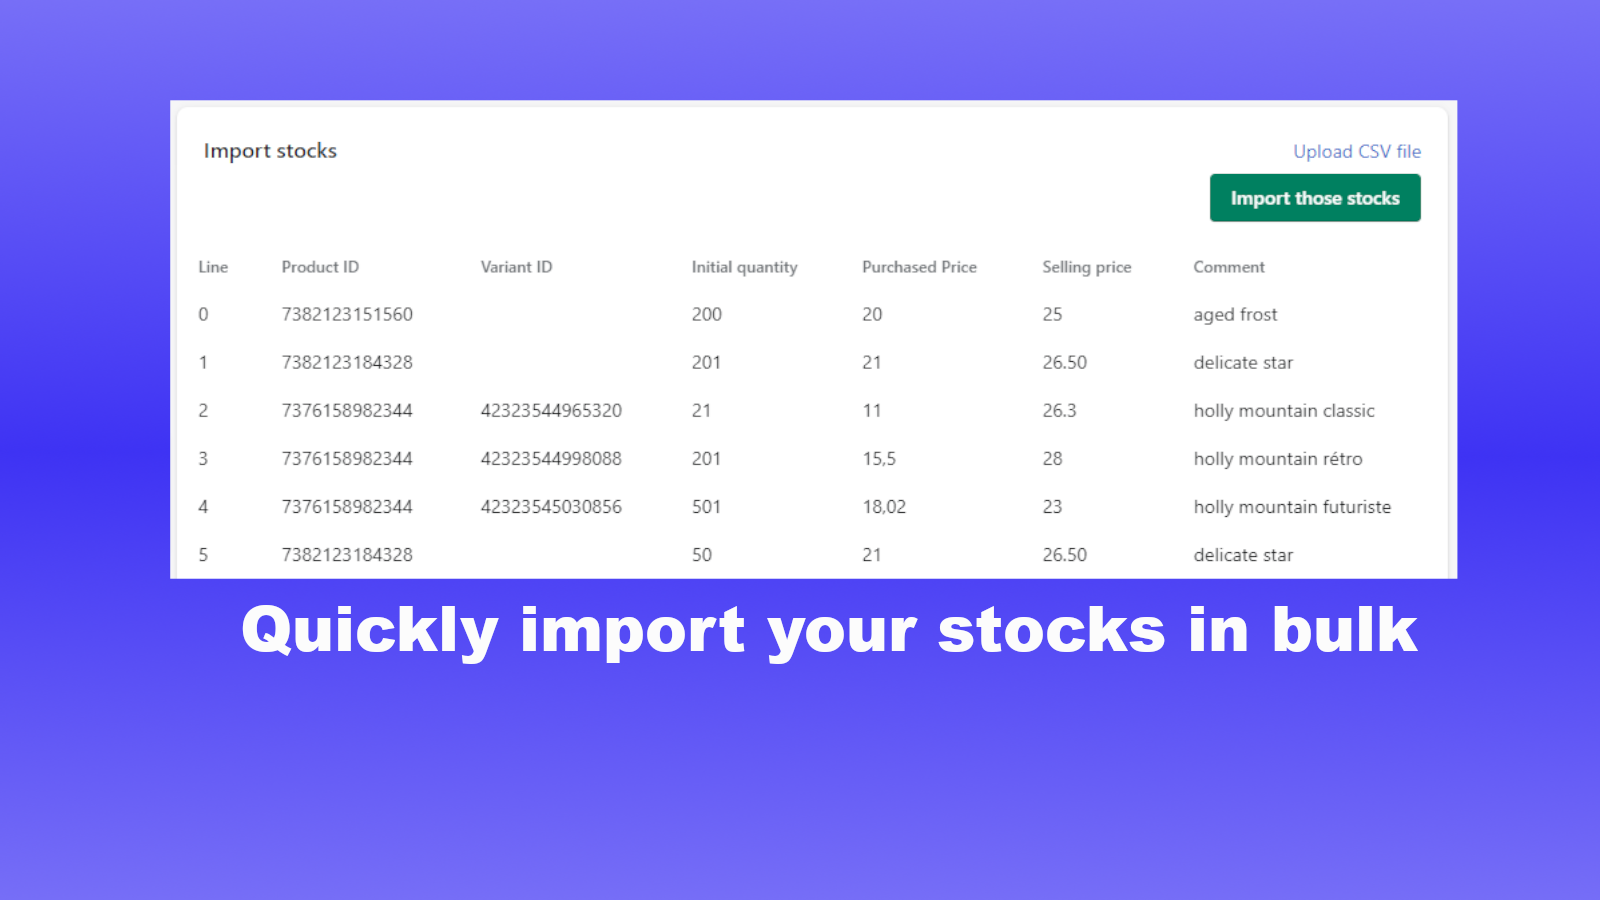 Quickly import your stocks in bulk